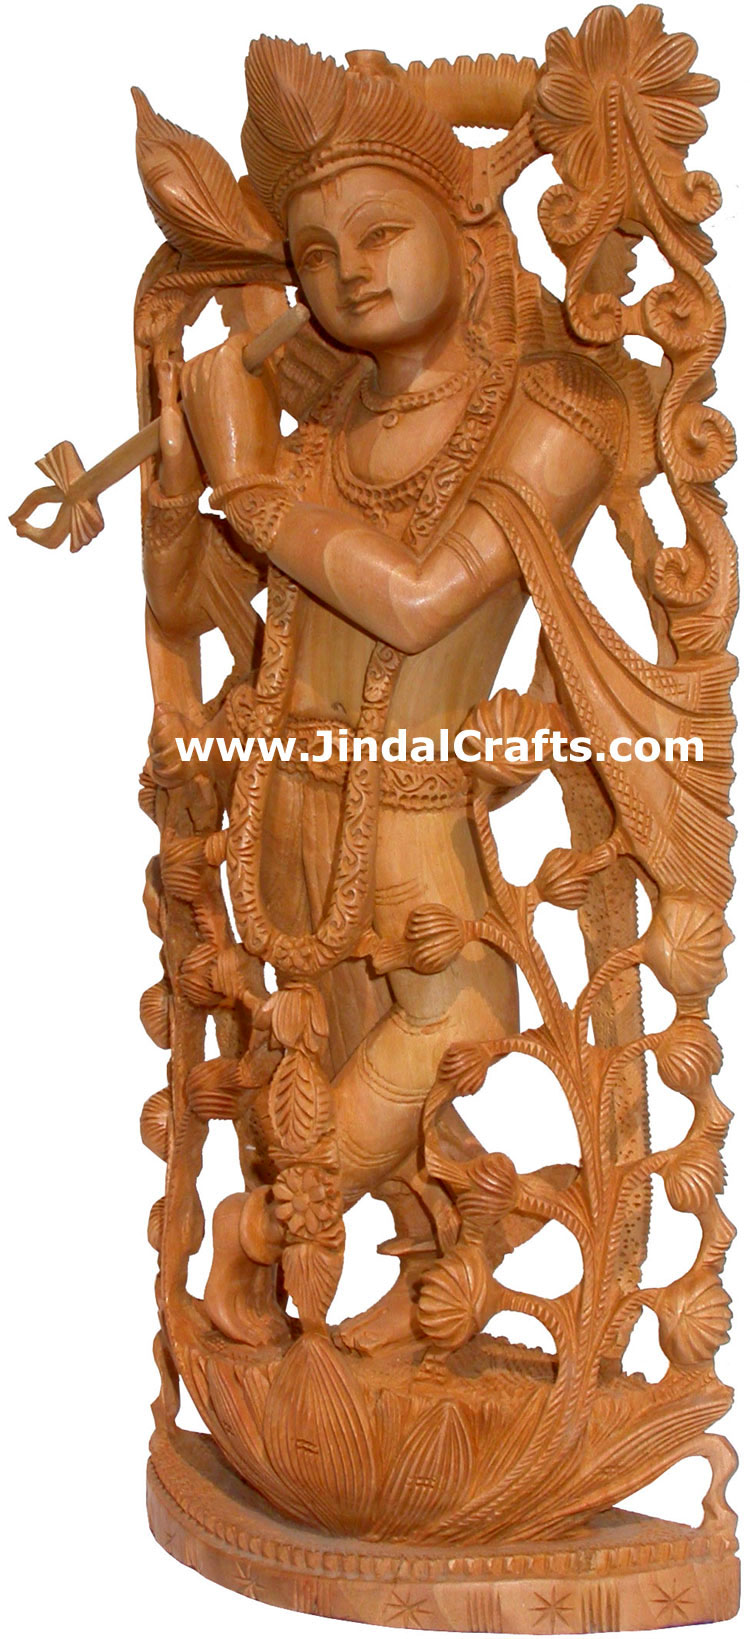 Hand Carved Wooden Lord Krishna Figure Indian Art